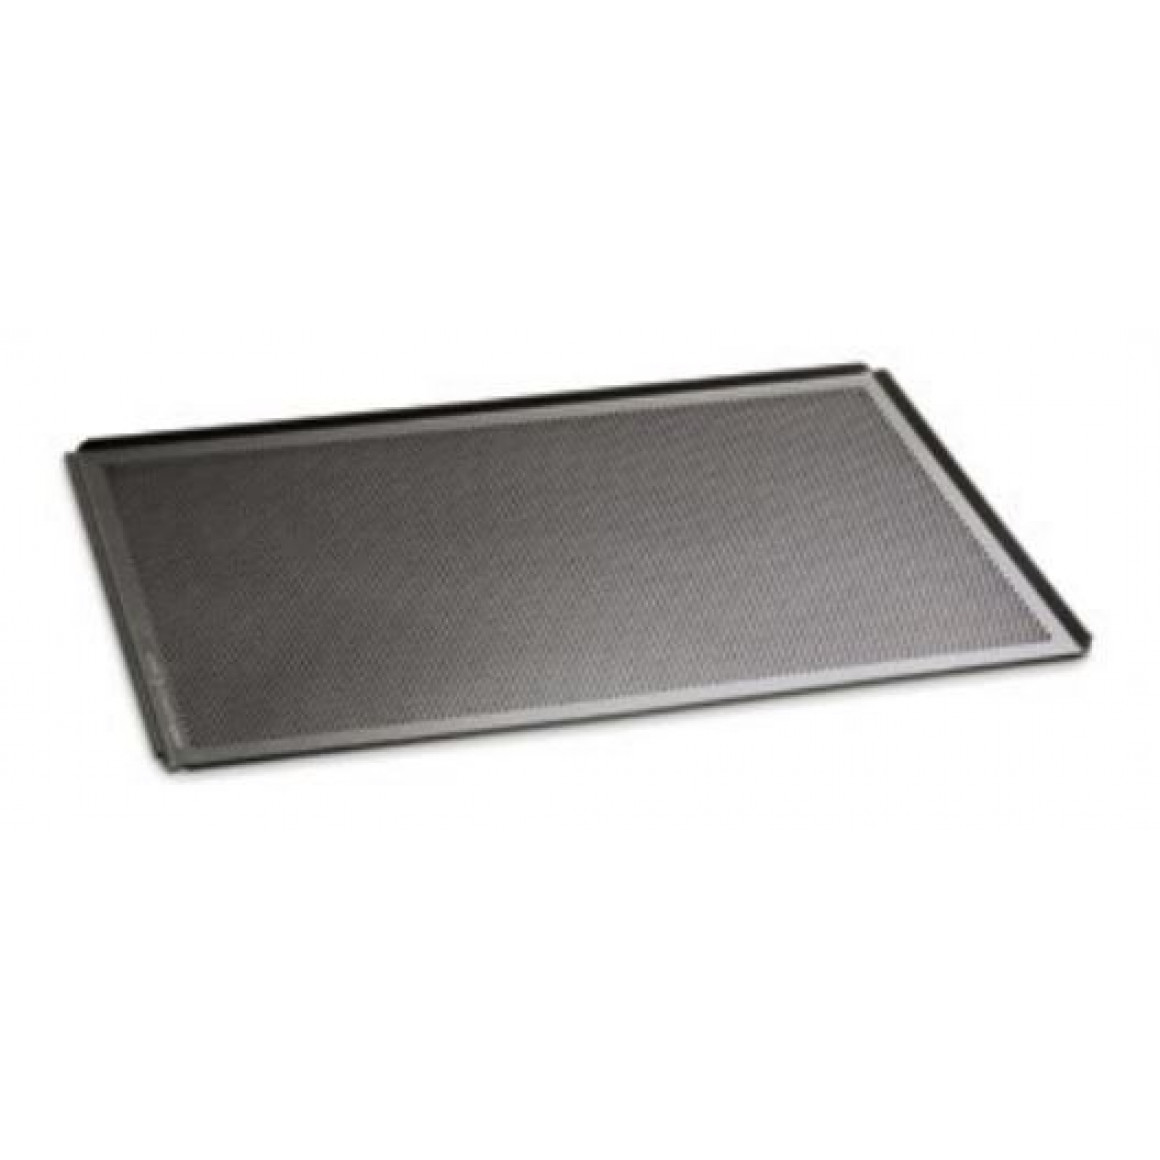 Baking tray, perforated, non-stick coating 1/1 GN